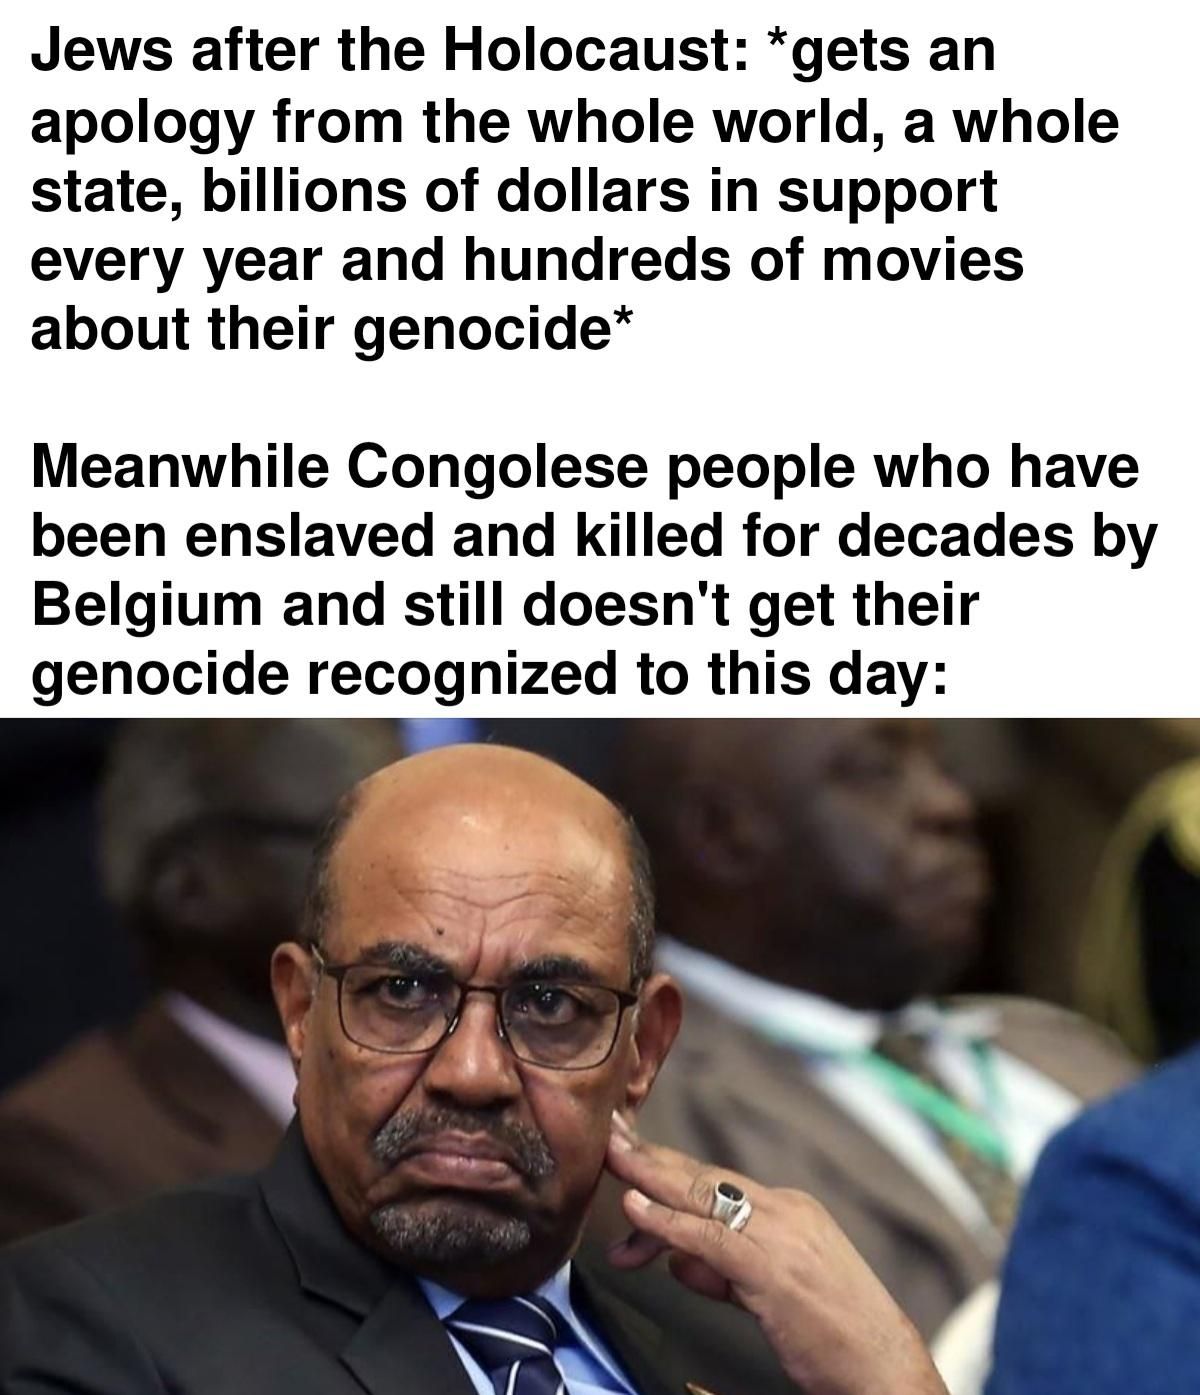 The holocaust was horrible but the Congo free state genocide deserves the same attention as well